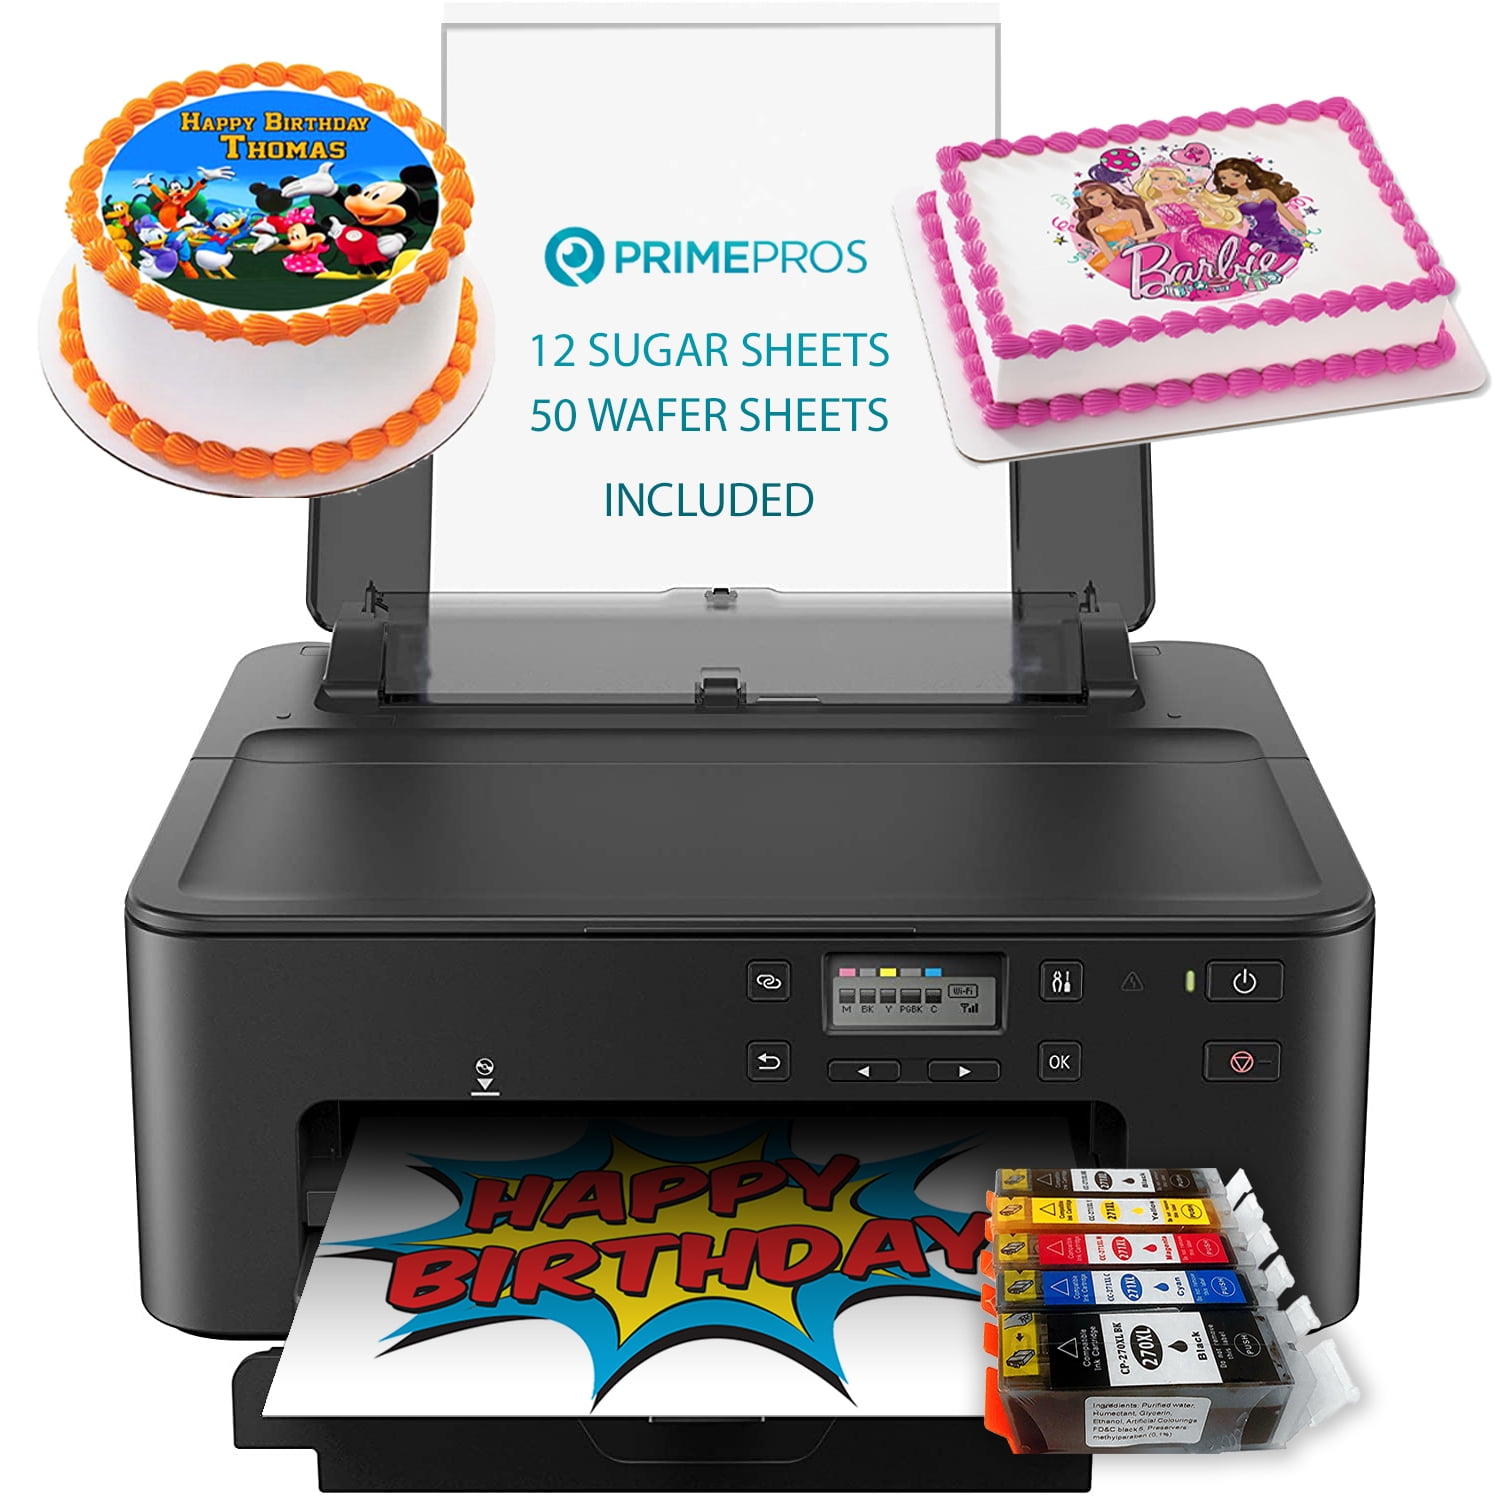 Powerful printer for cake decorating At Unbeatable Prices